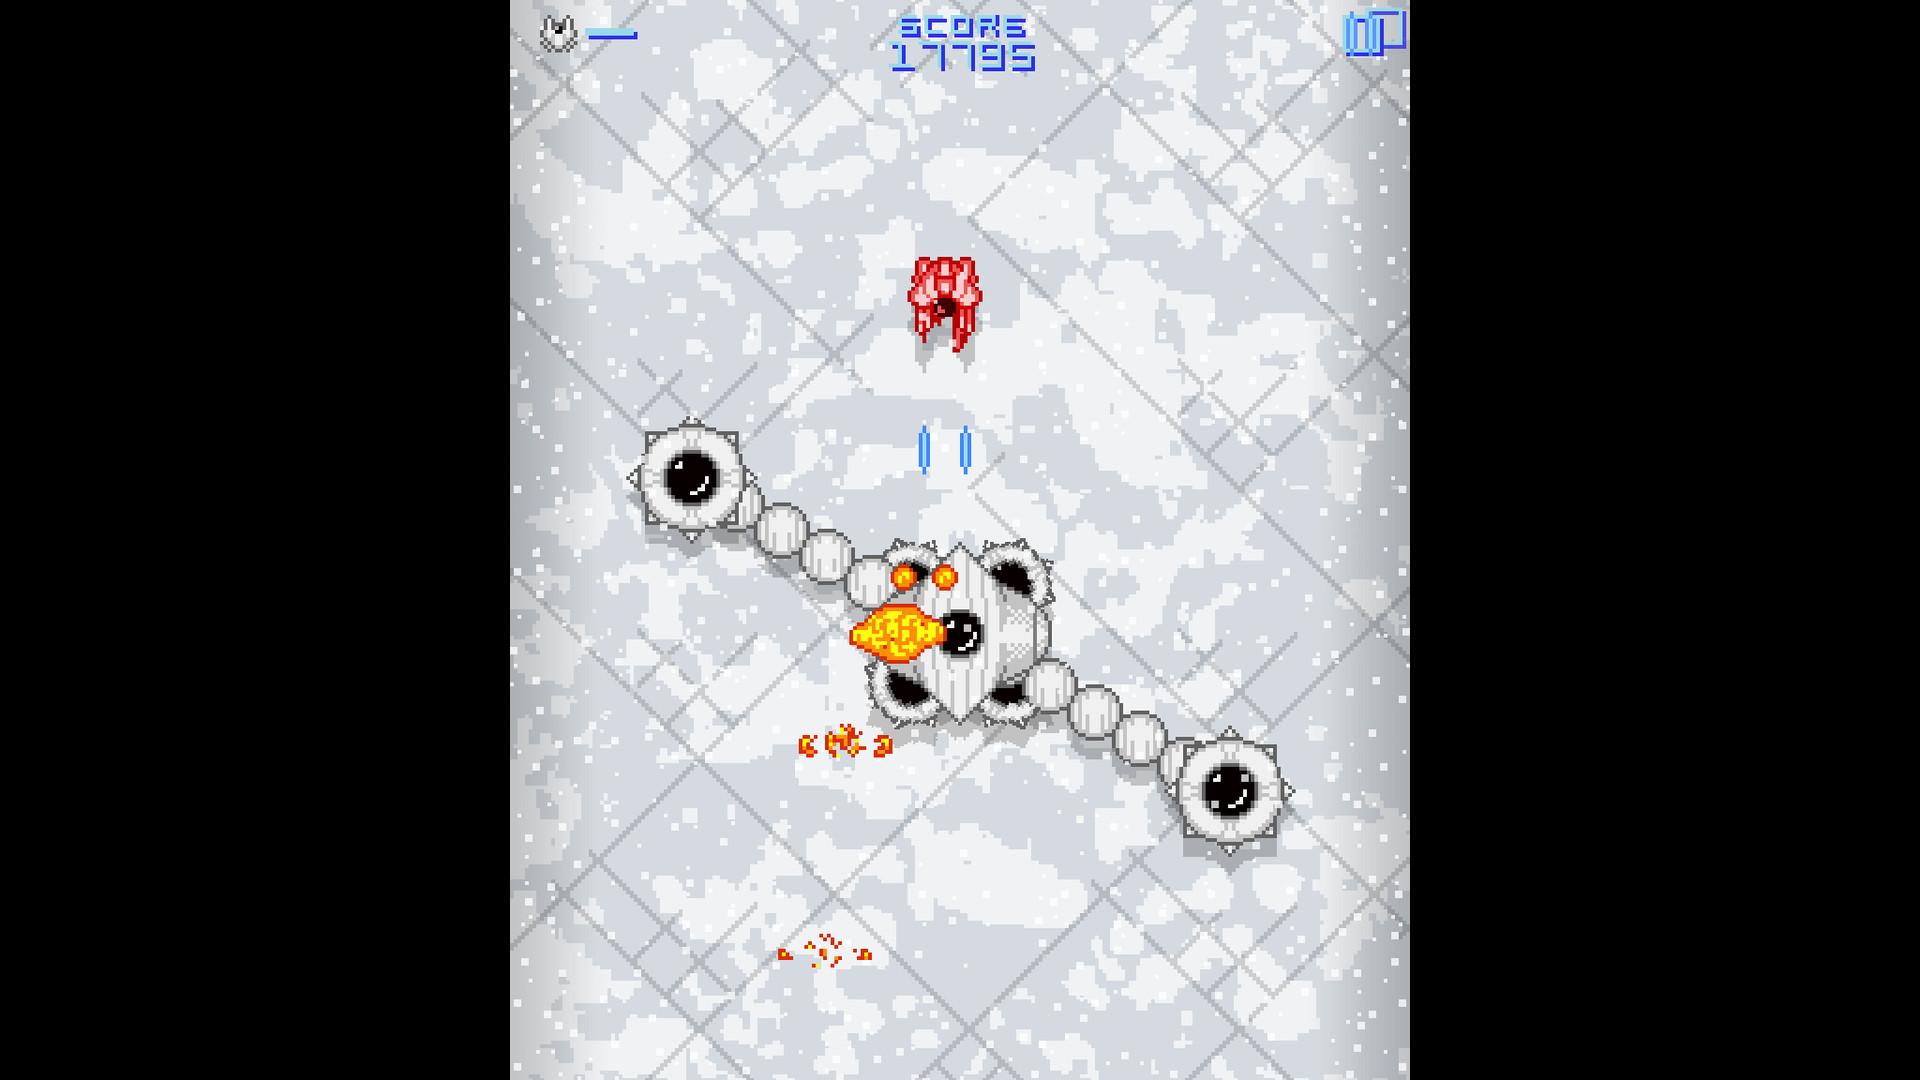 Screenshot №6 from game Mobile Astro